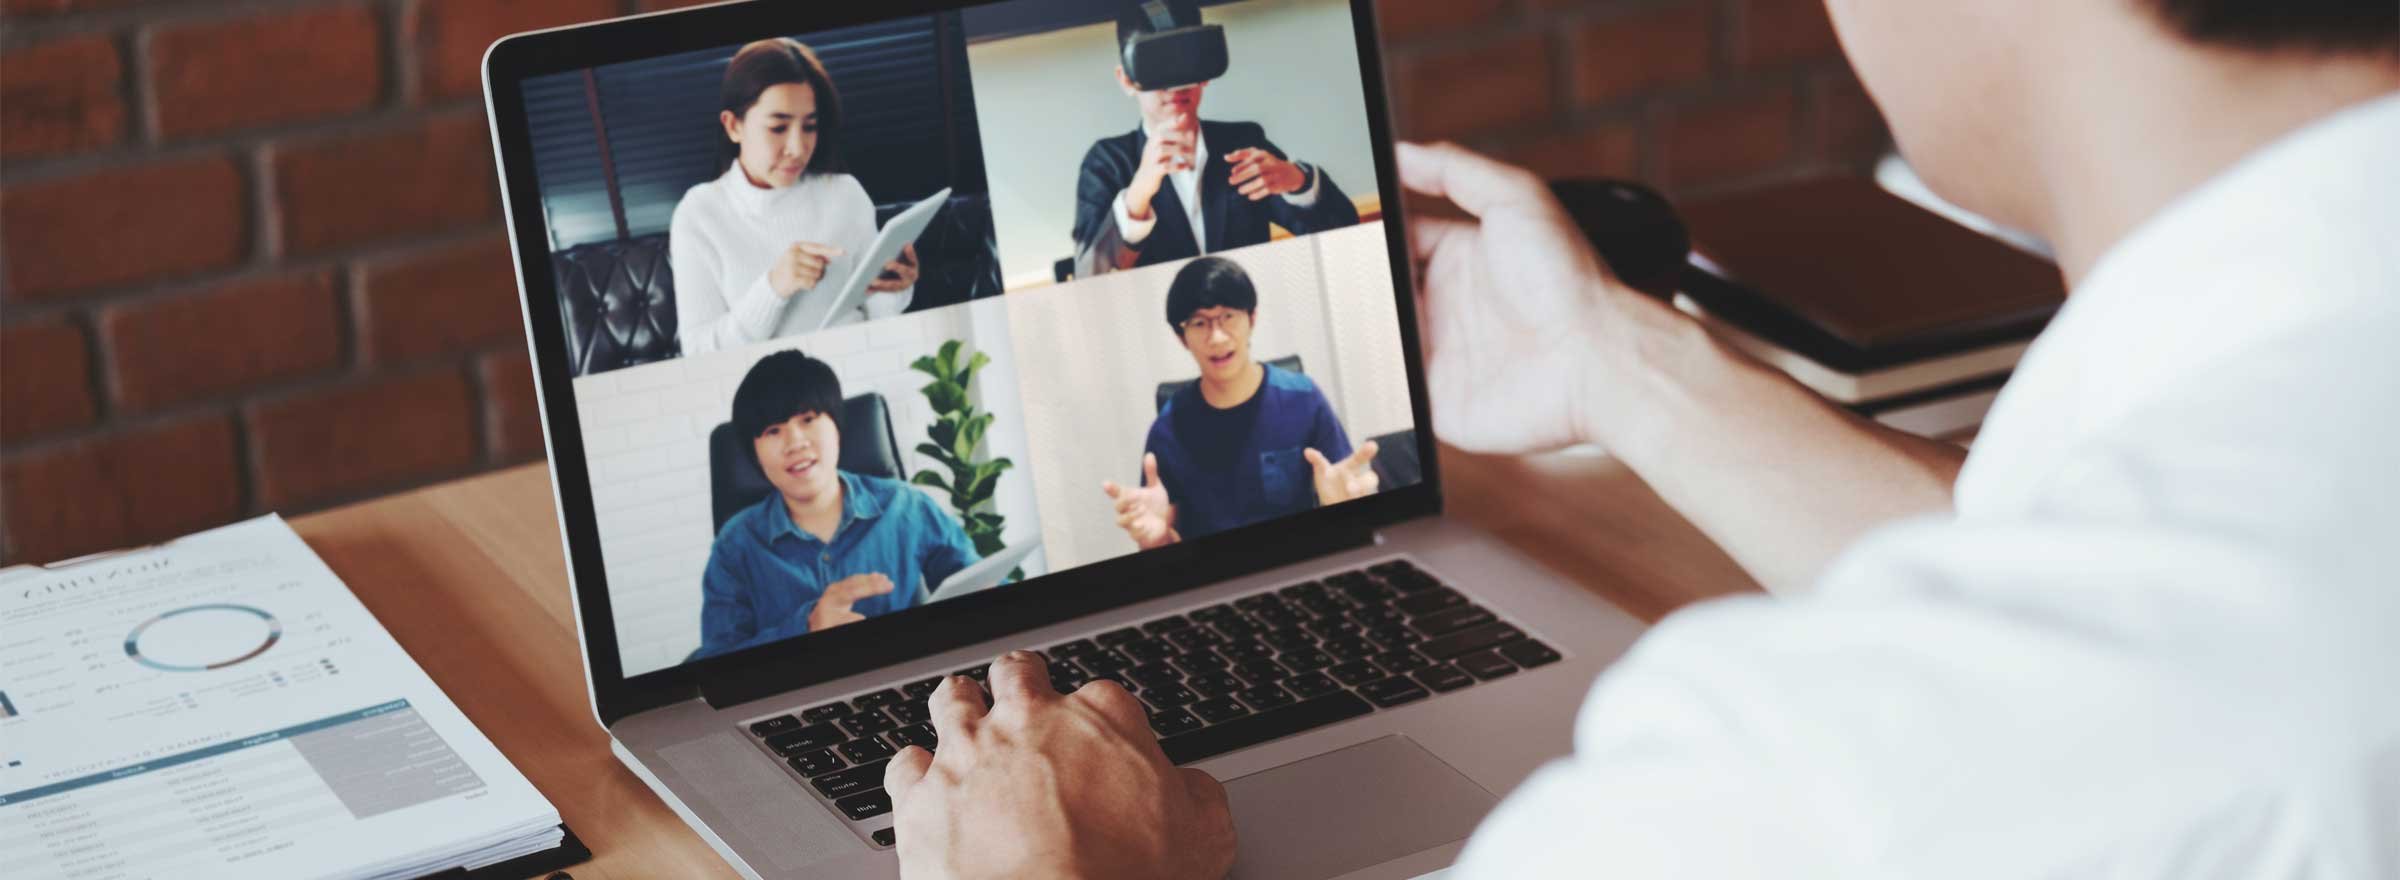 man having a video conference with four people